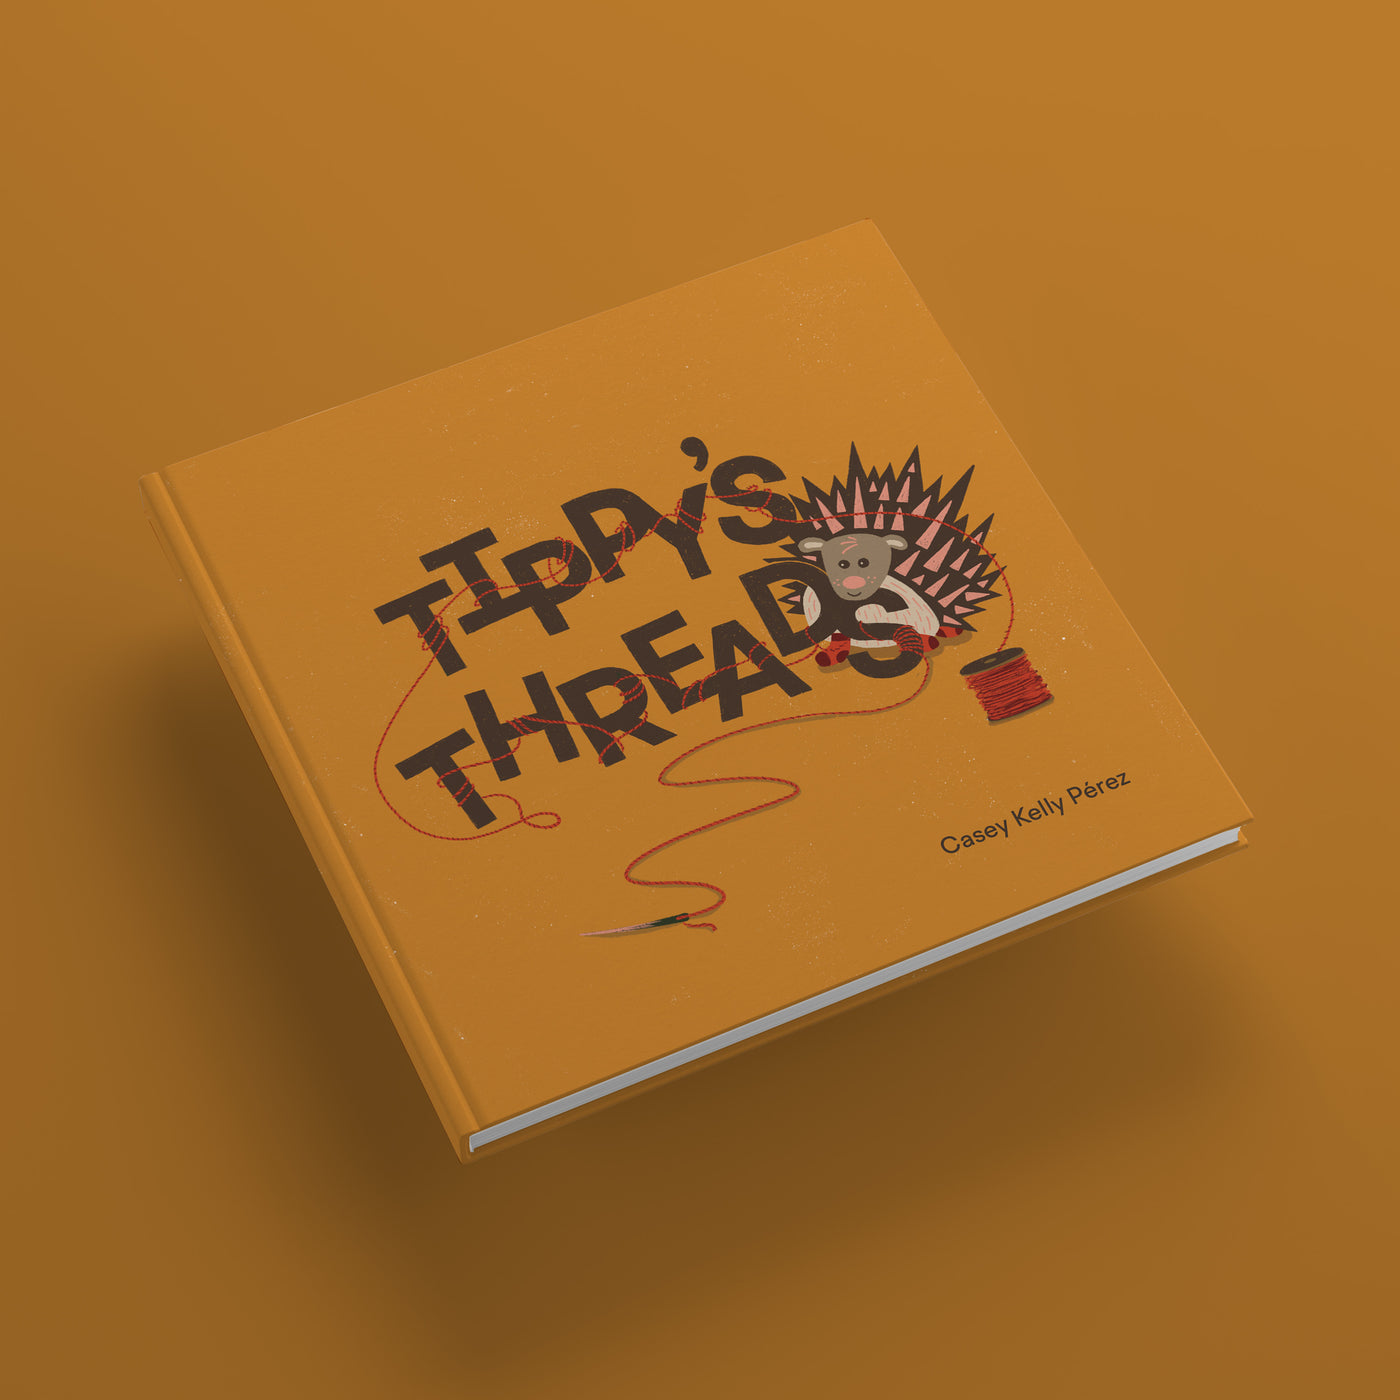 Tippy's Threads hardcover book cover, featuring a porcupine holding a needle and thread that is wrapping around handlettered title